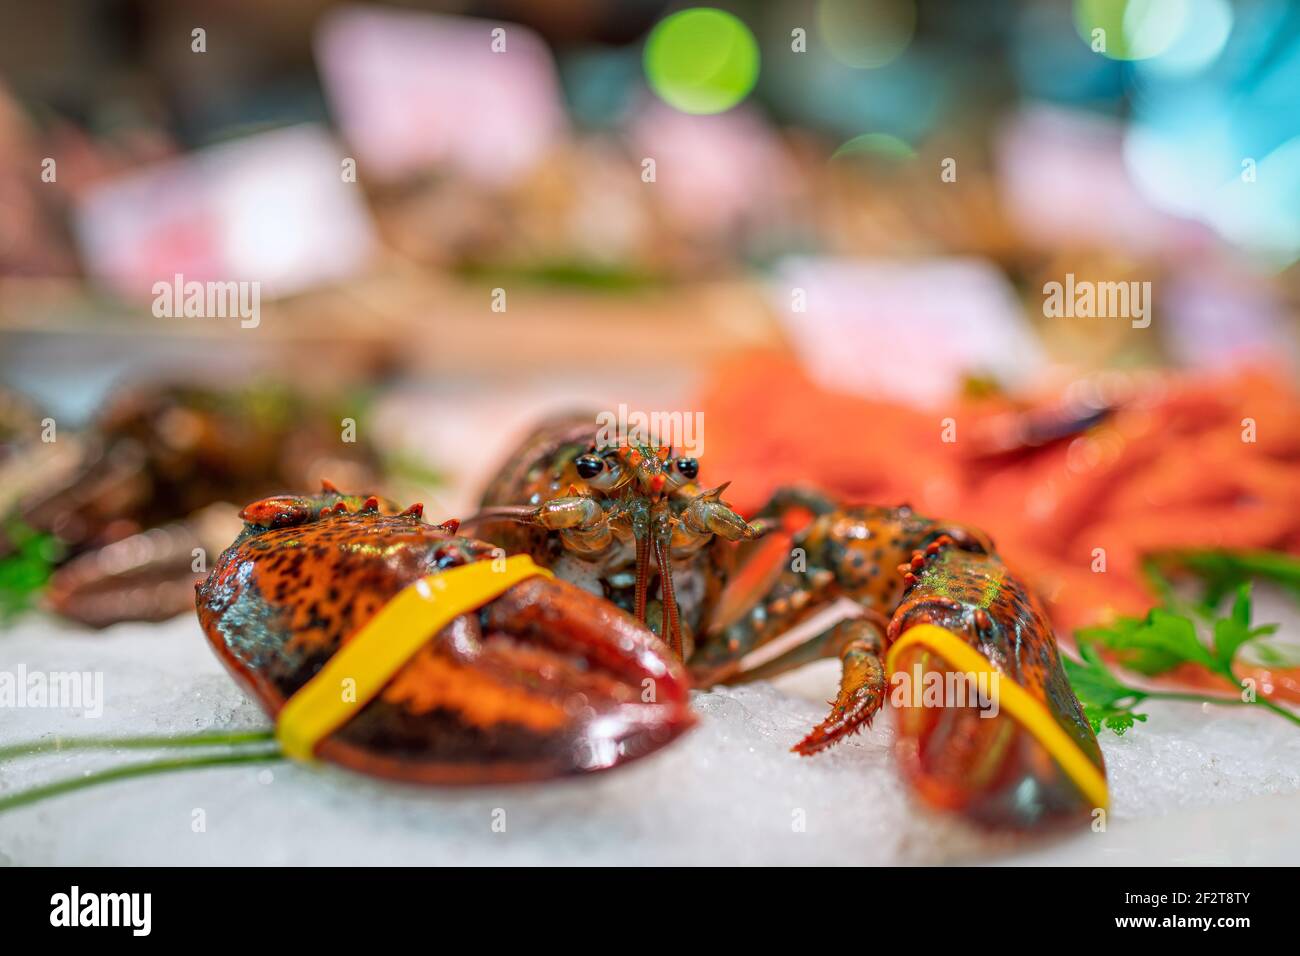 Lobster with bands on claws on the ice at the counter of the fish market. Close-up, selective focus, bokeh. Stock Photo